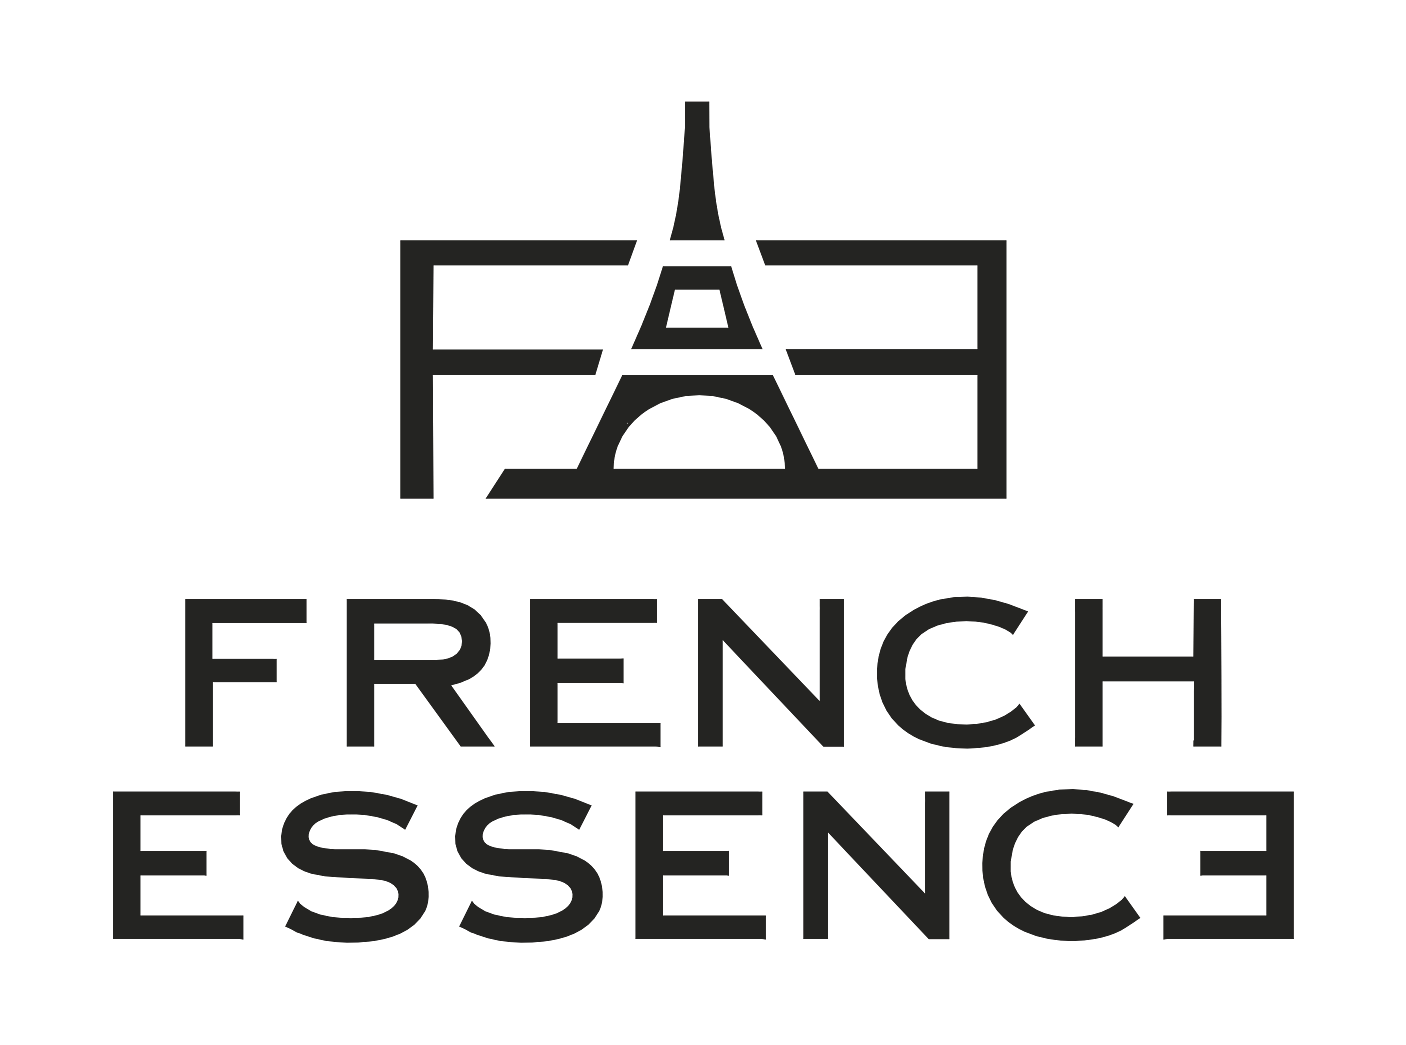 French Essence